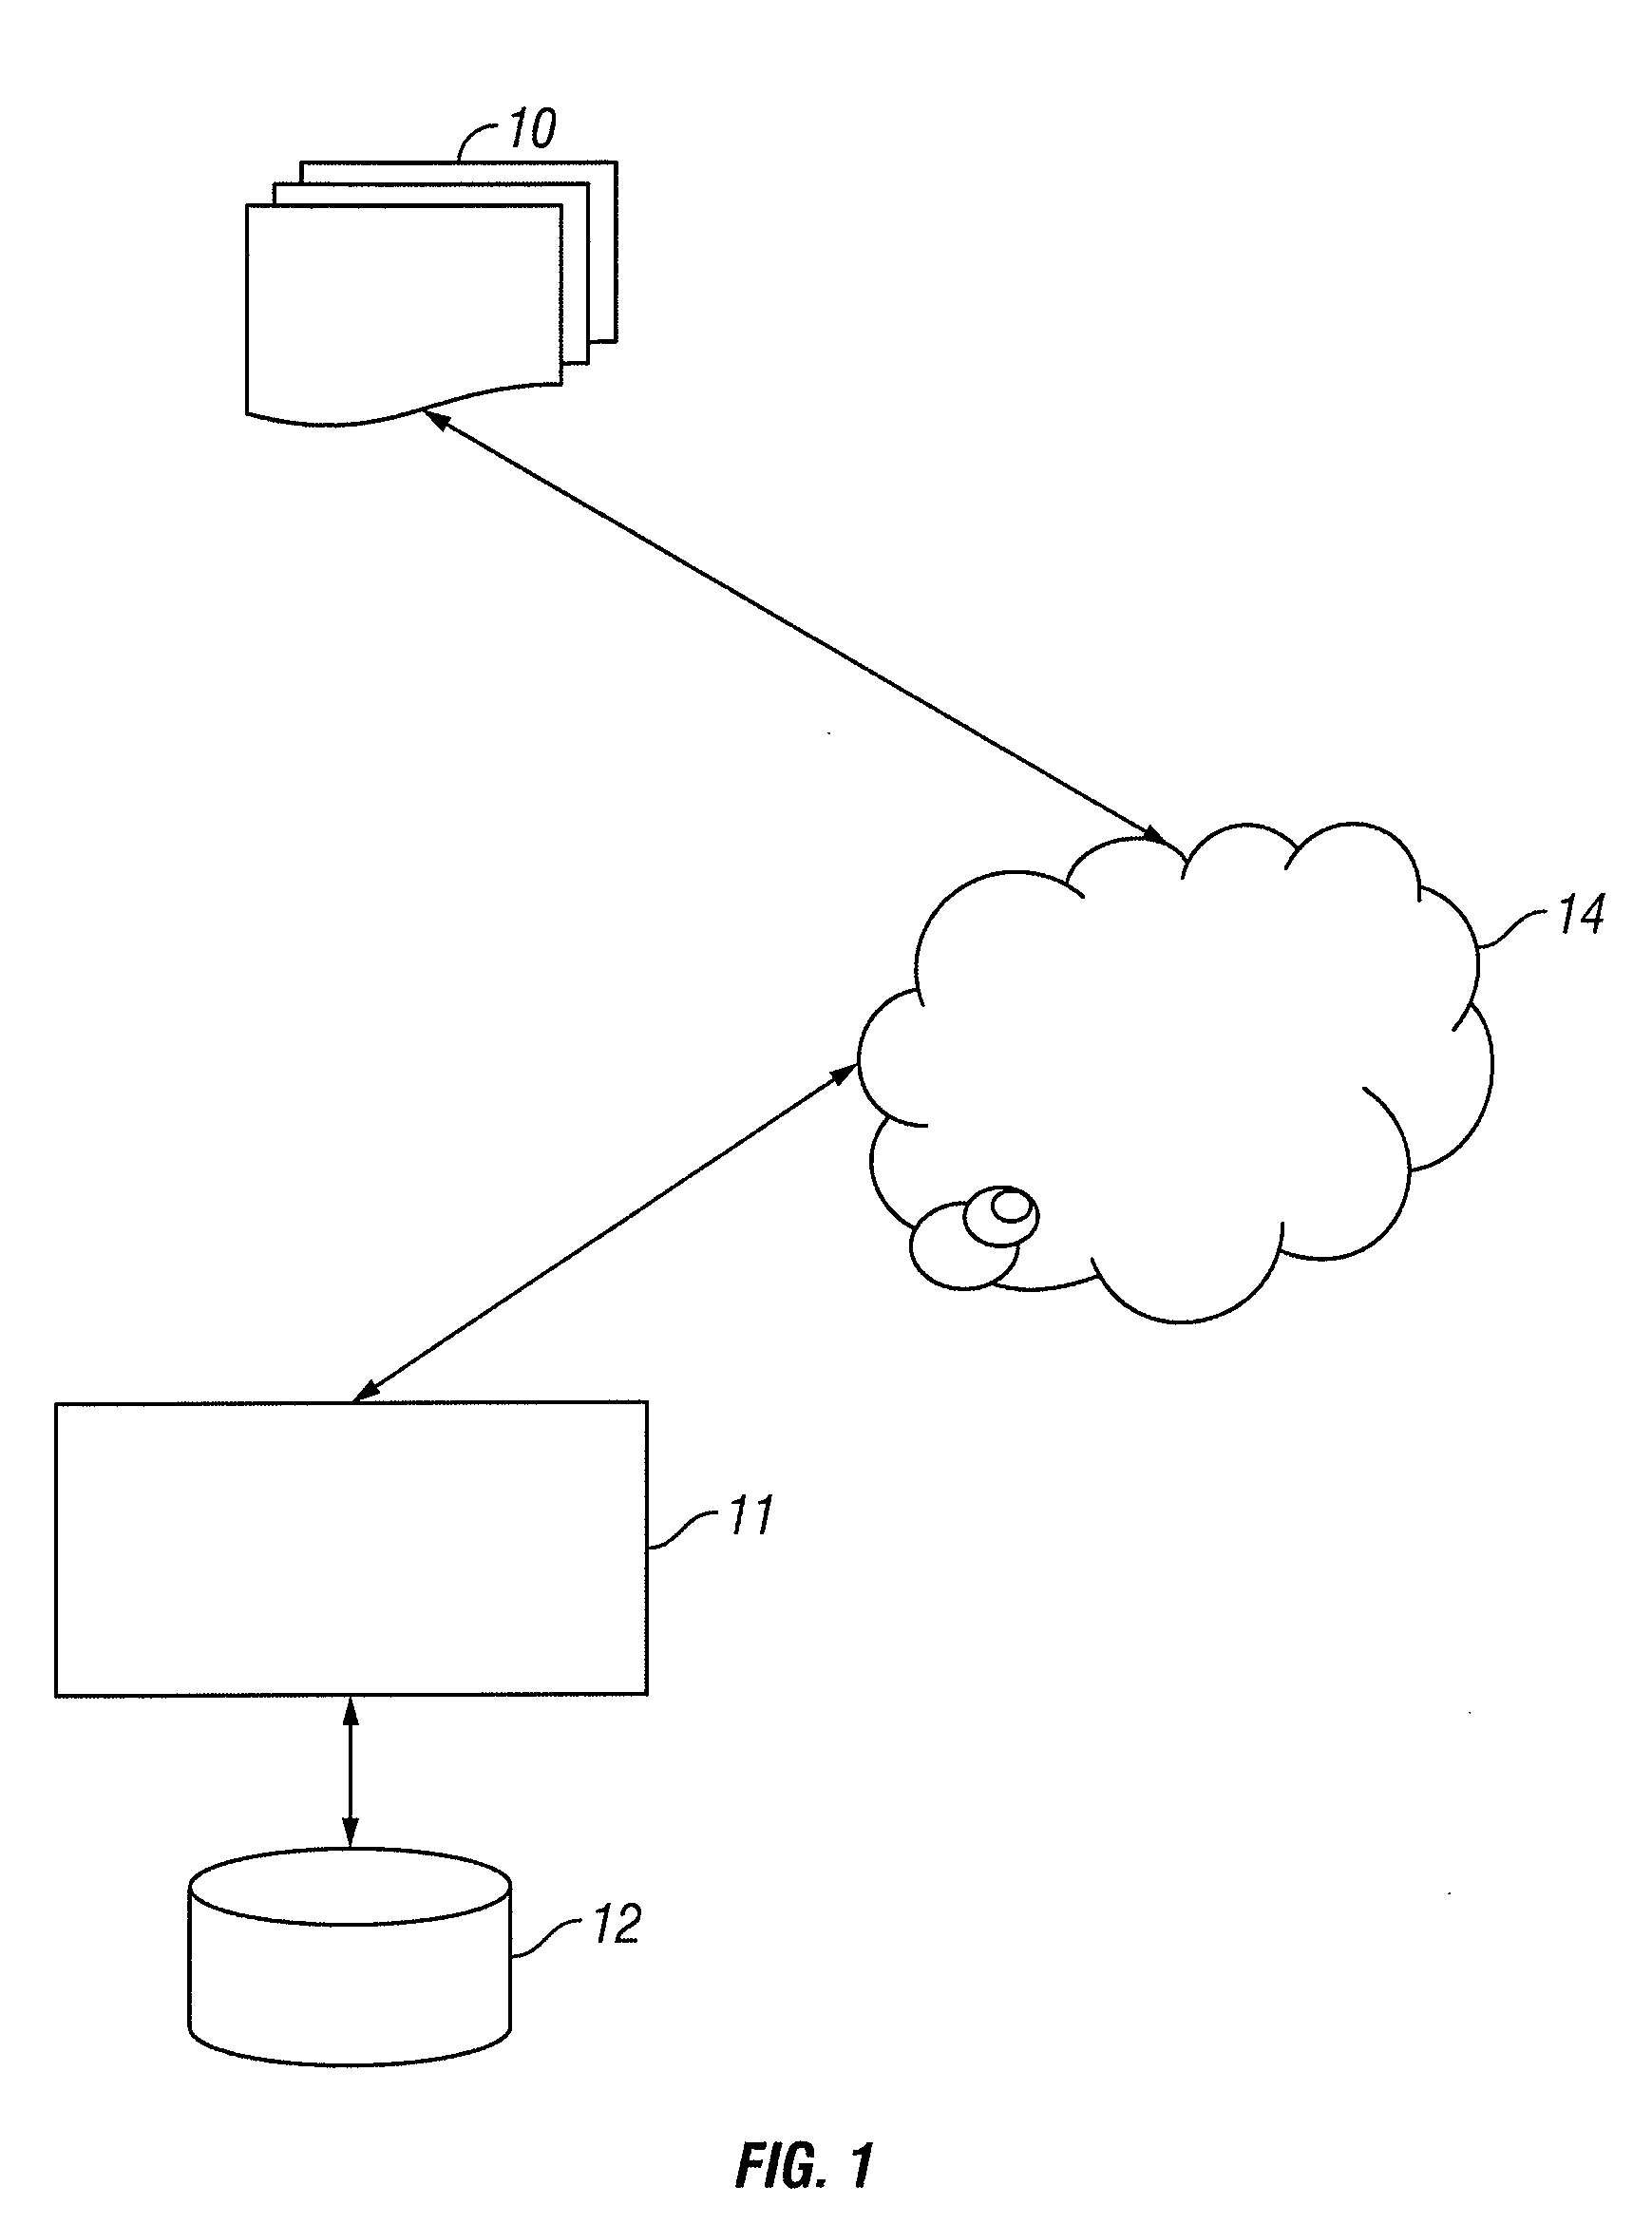 System and Method for Automated Creation of Video Game Highlights